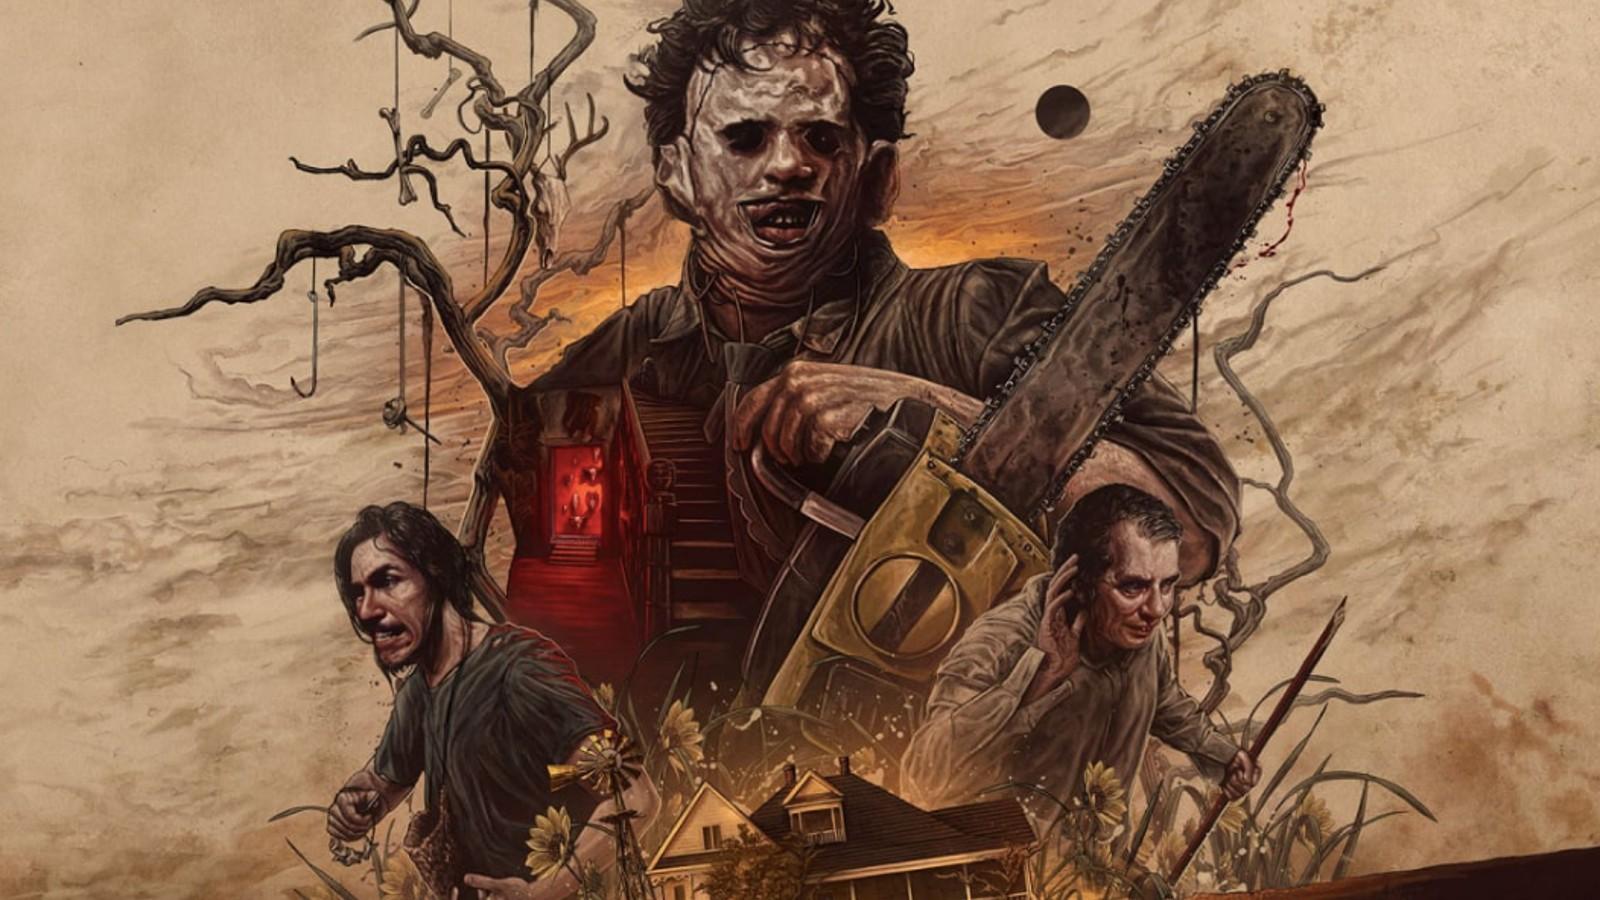 An image of official artwork from The Texas Chainsaw Massacre.